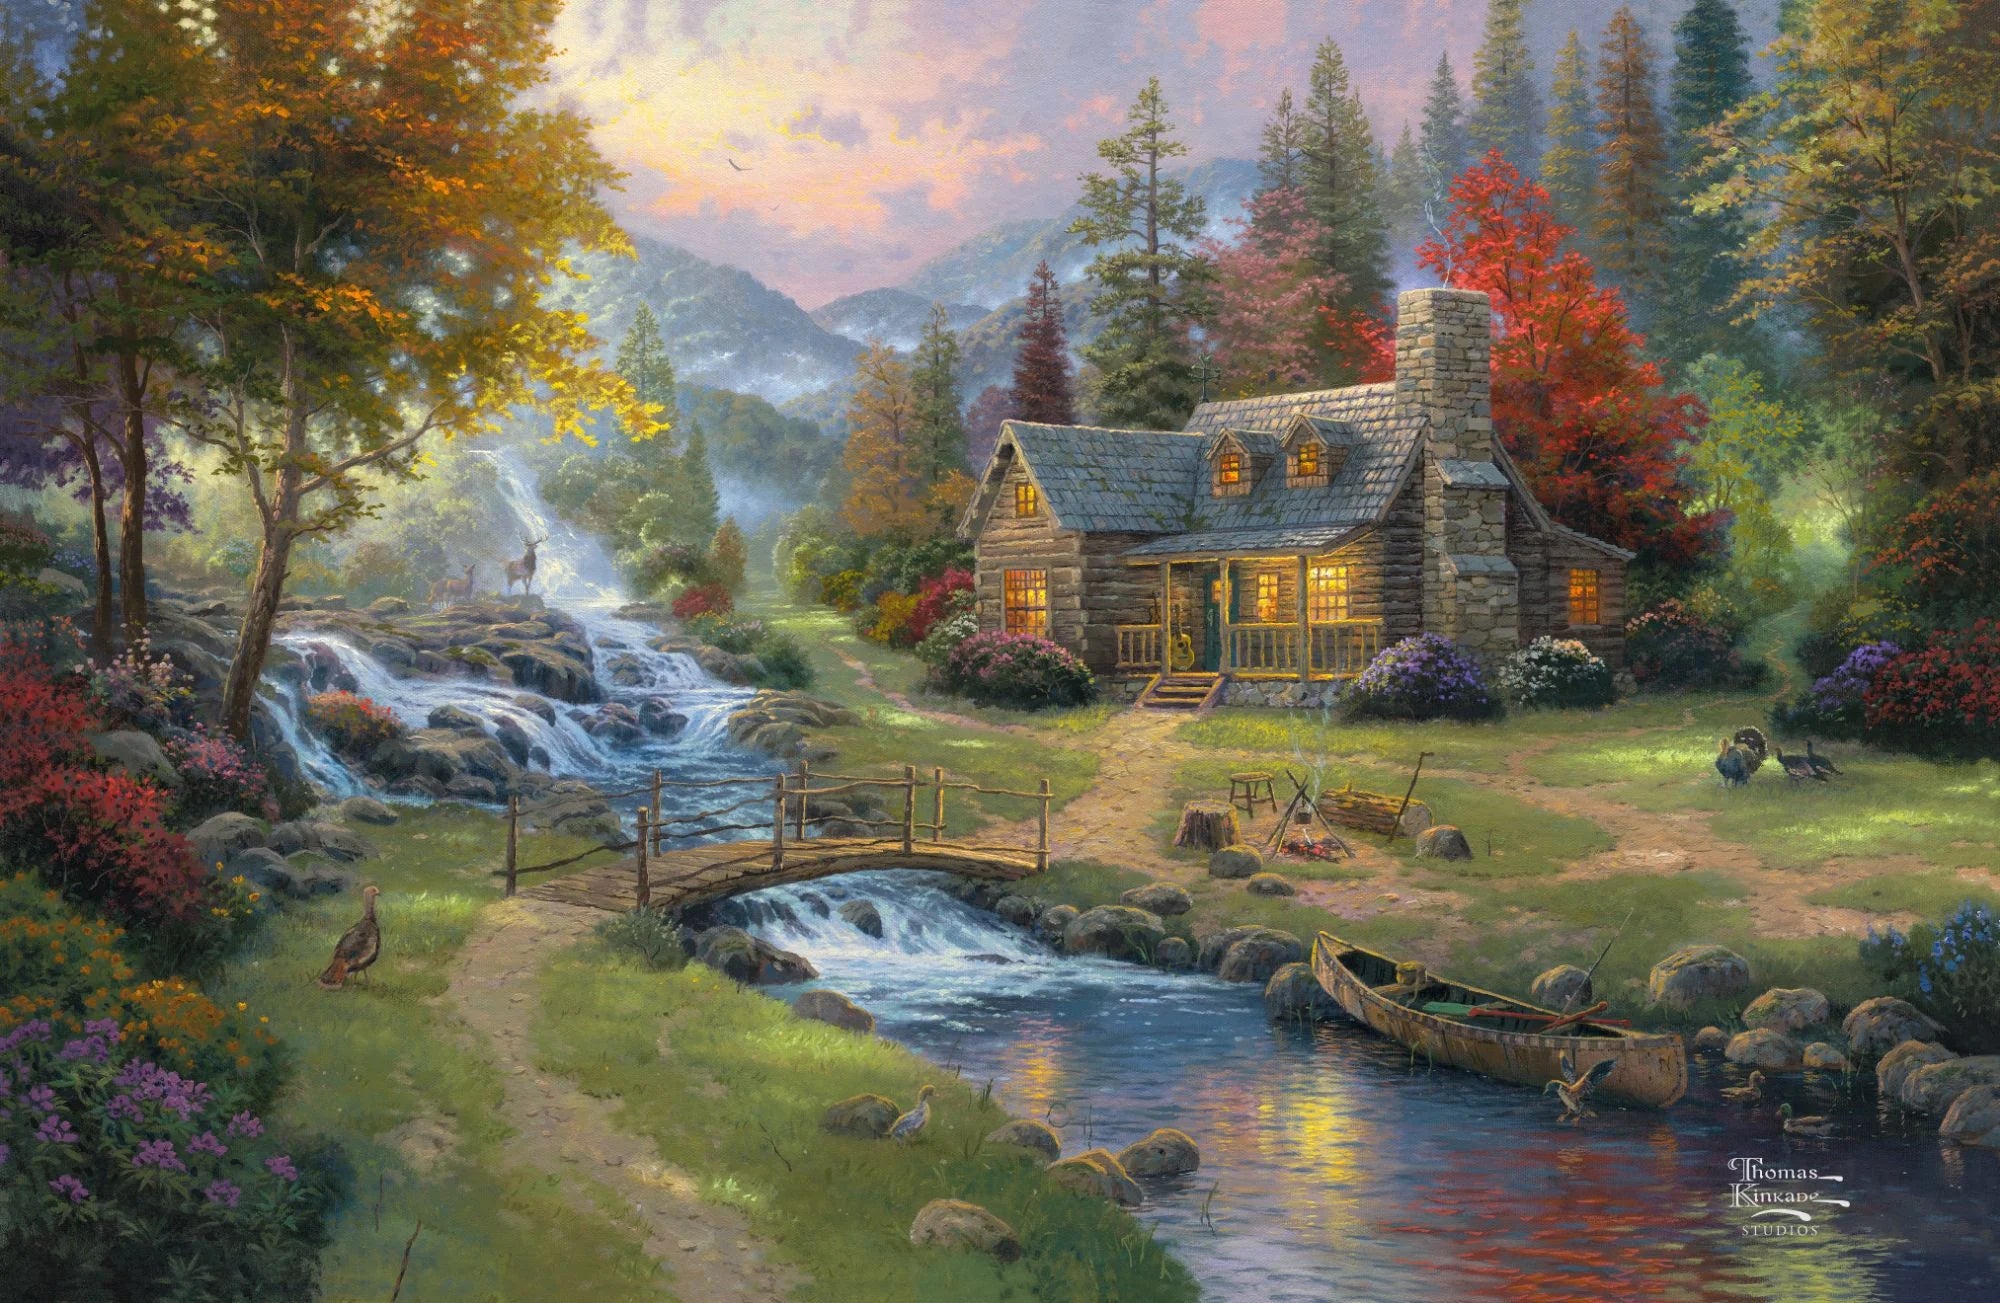 Thomas Kinkade's Mountain Paradise: A collector's dream, blending serene landscapes with cozy cabins. This masterpiece captivates art enthusiasts with its enchanting charm.